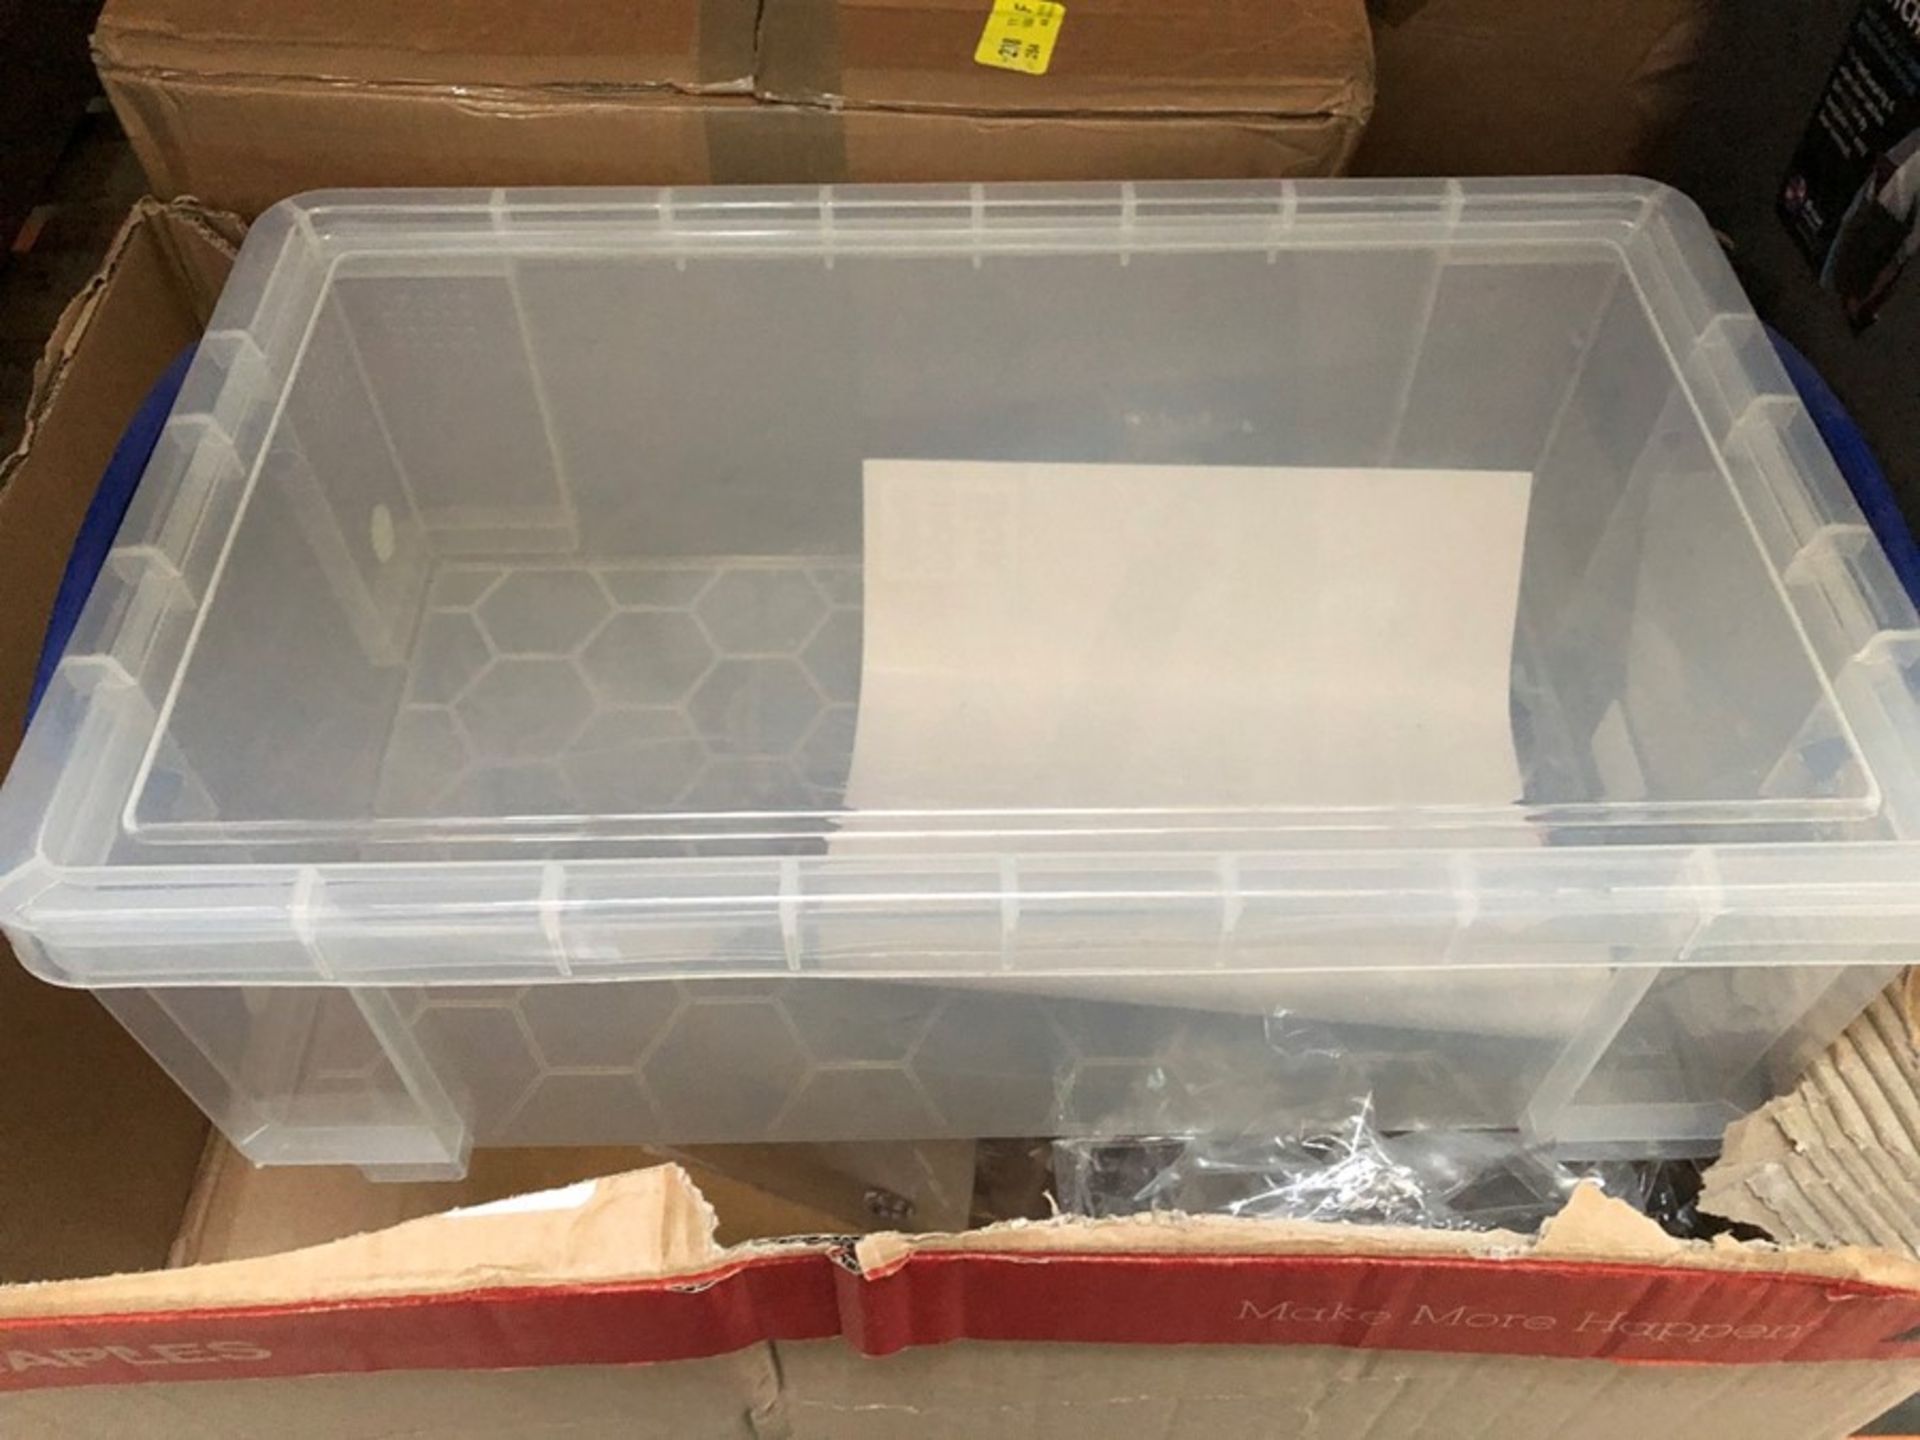 1 LOT TO CONTAIN AN ASSORTMENT OF STORAGE PRODUCTS / INCLUDES 1 X CLEAR PLASTIC 22L STORAGE BOX